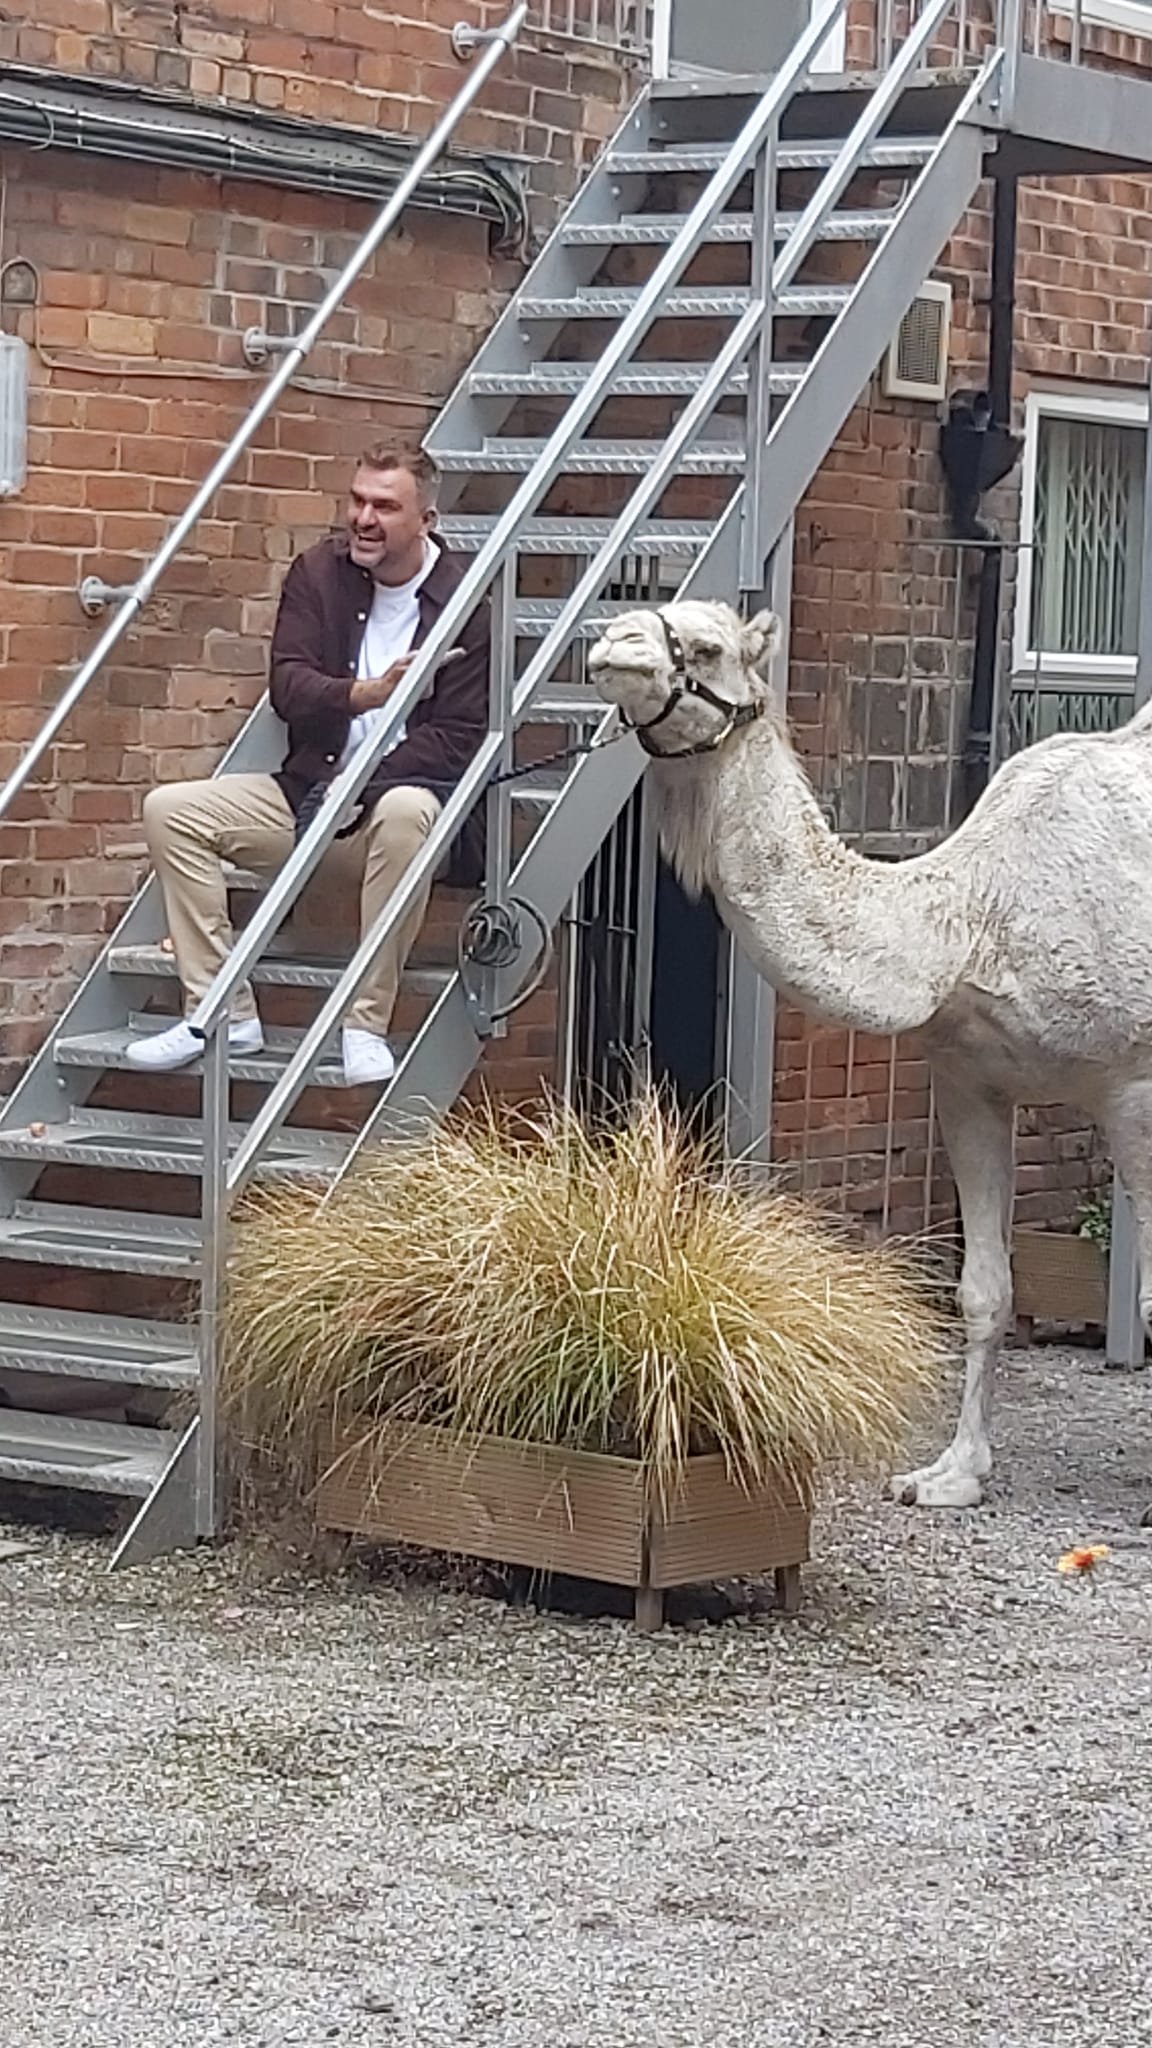 camel and stairs.jpeg